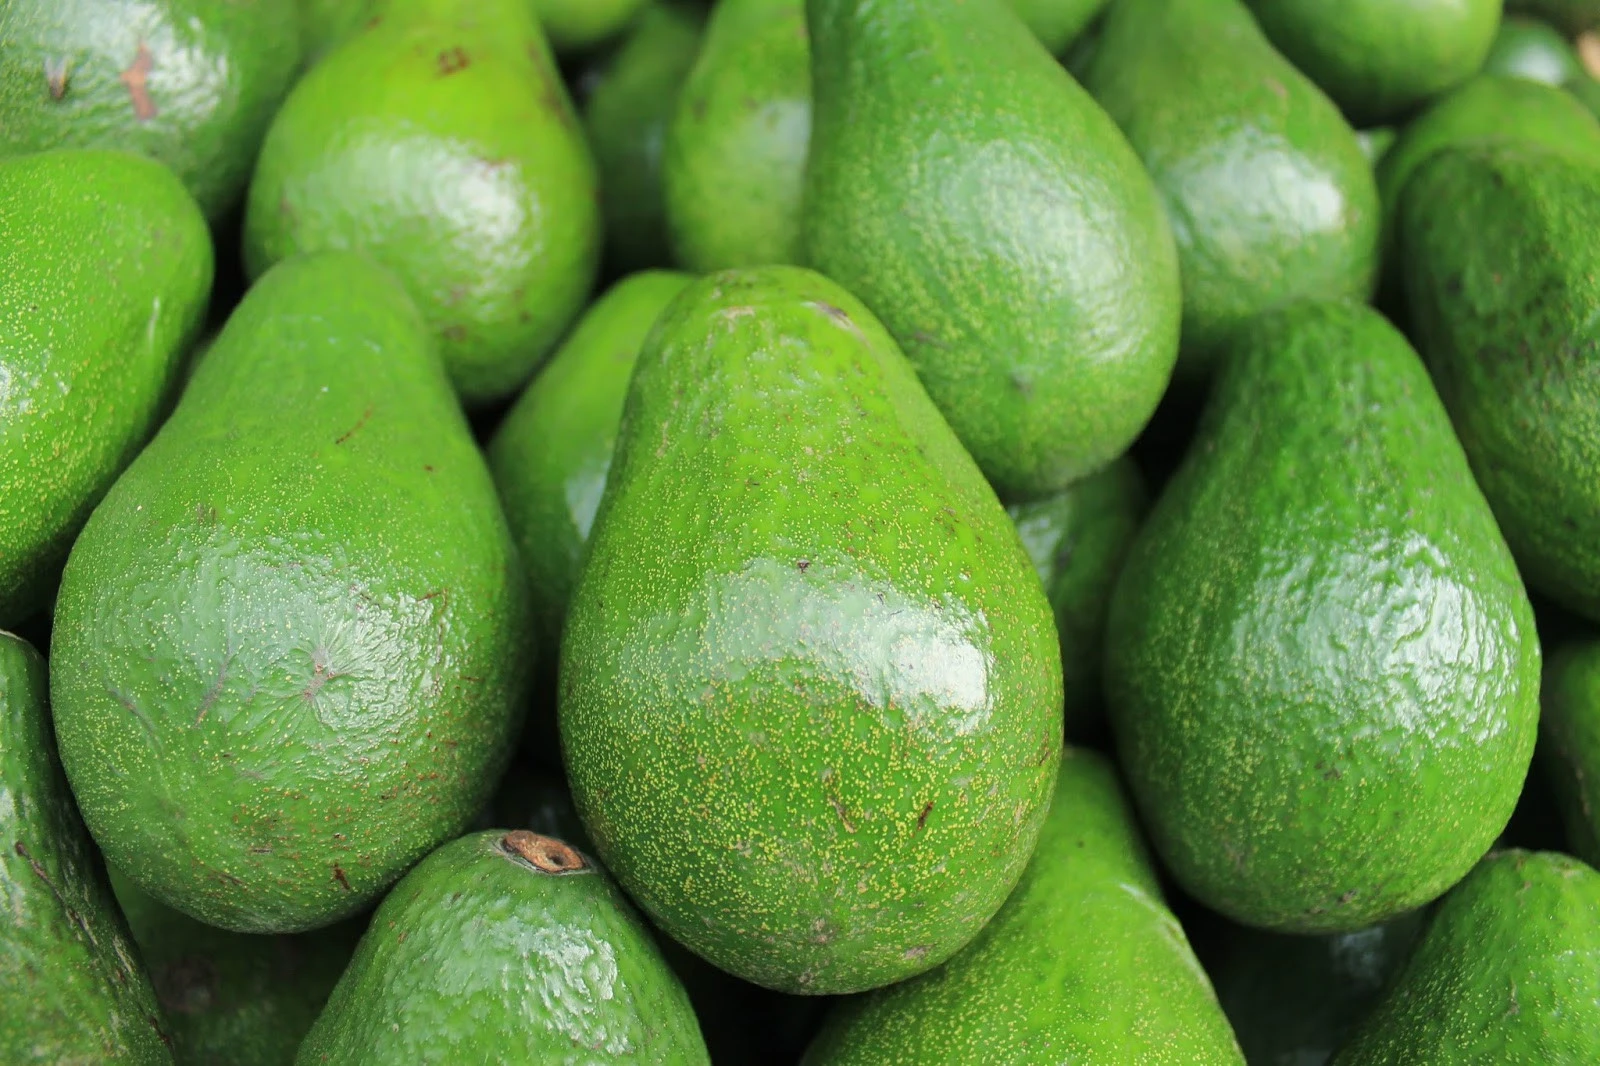 Fresh Hass and Fuerte Avocados from South Africa